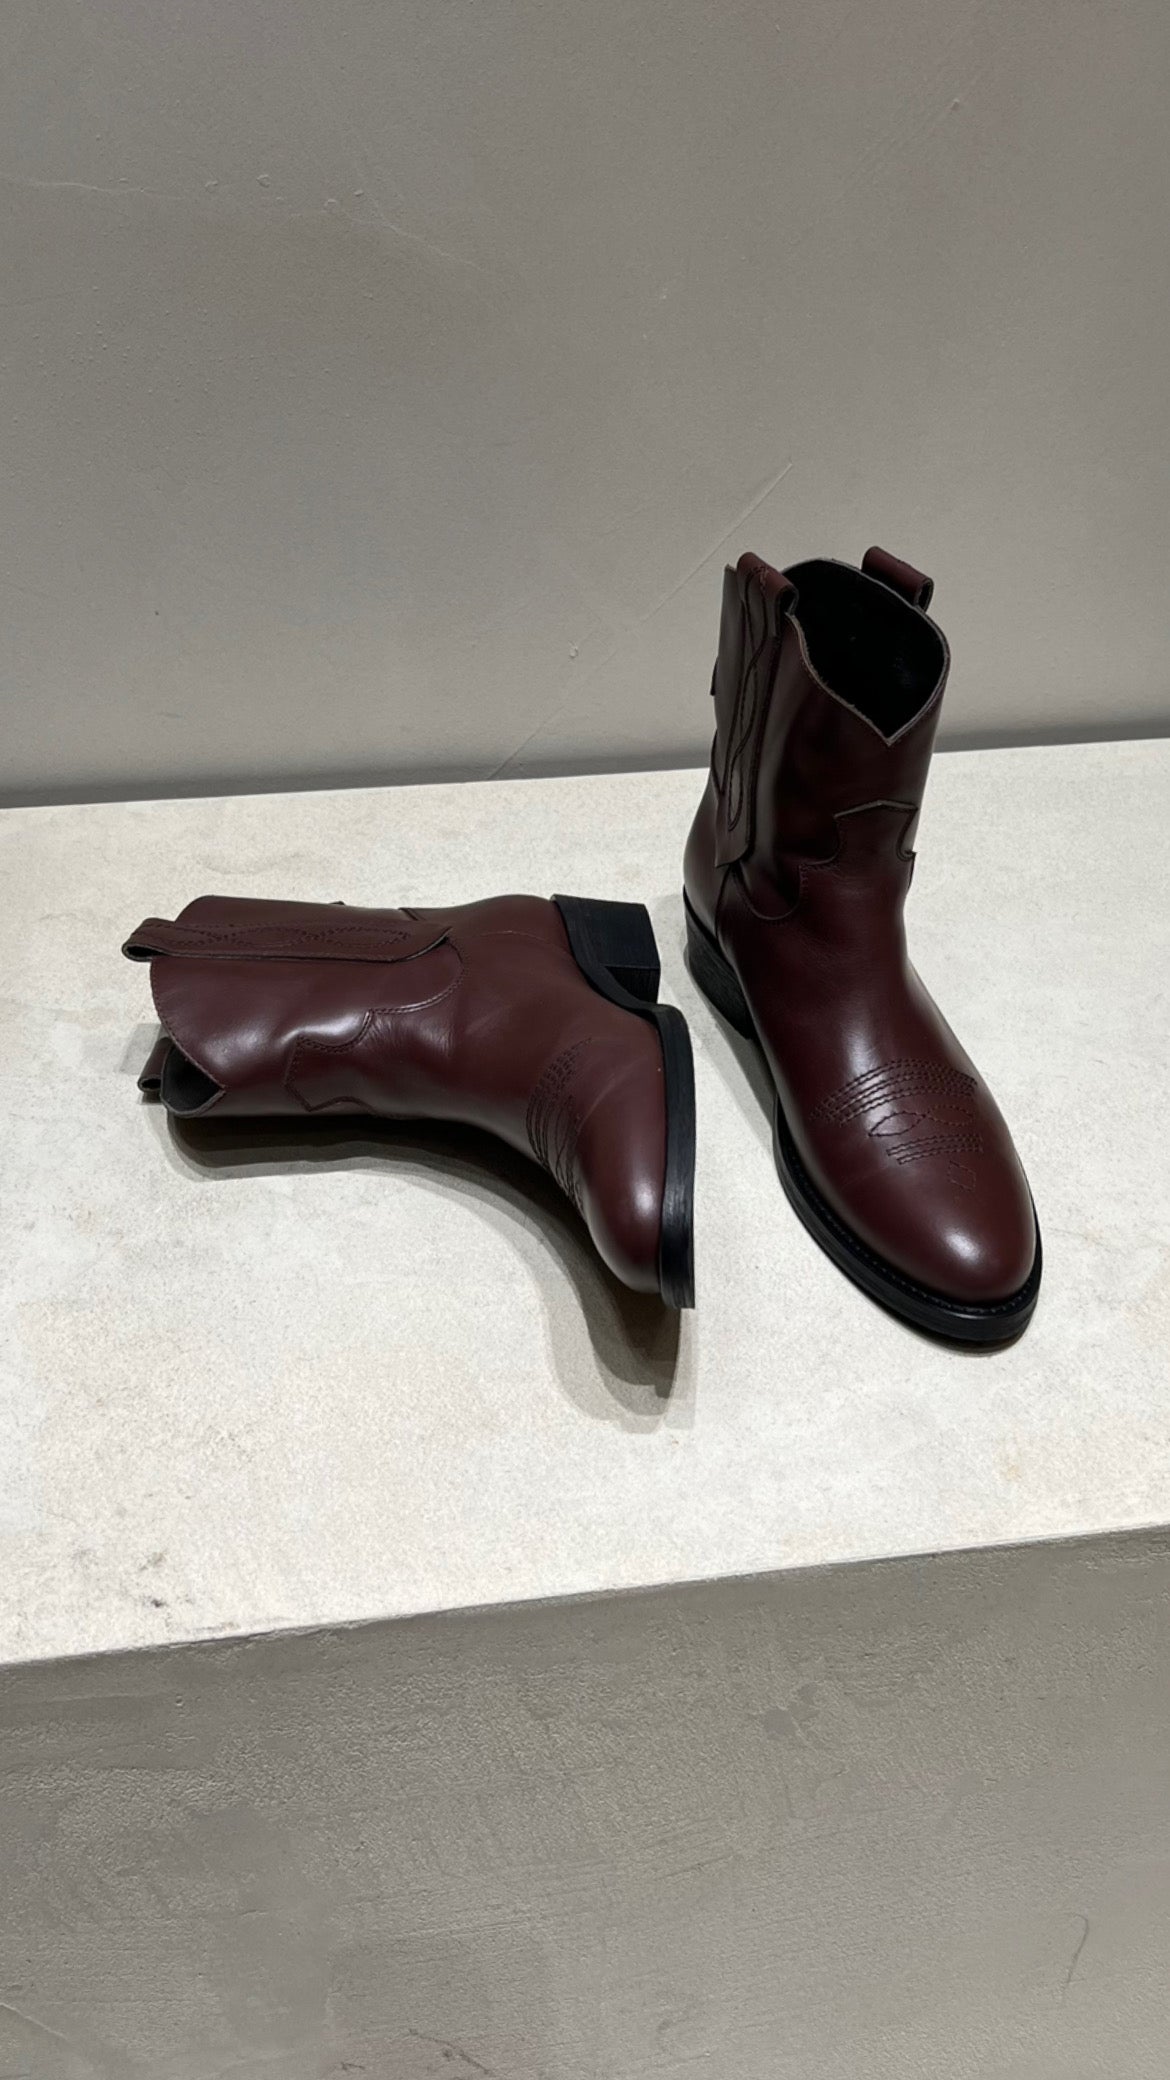 Anne boots, chestnut leather